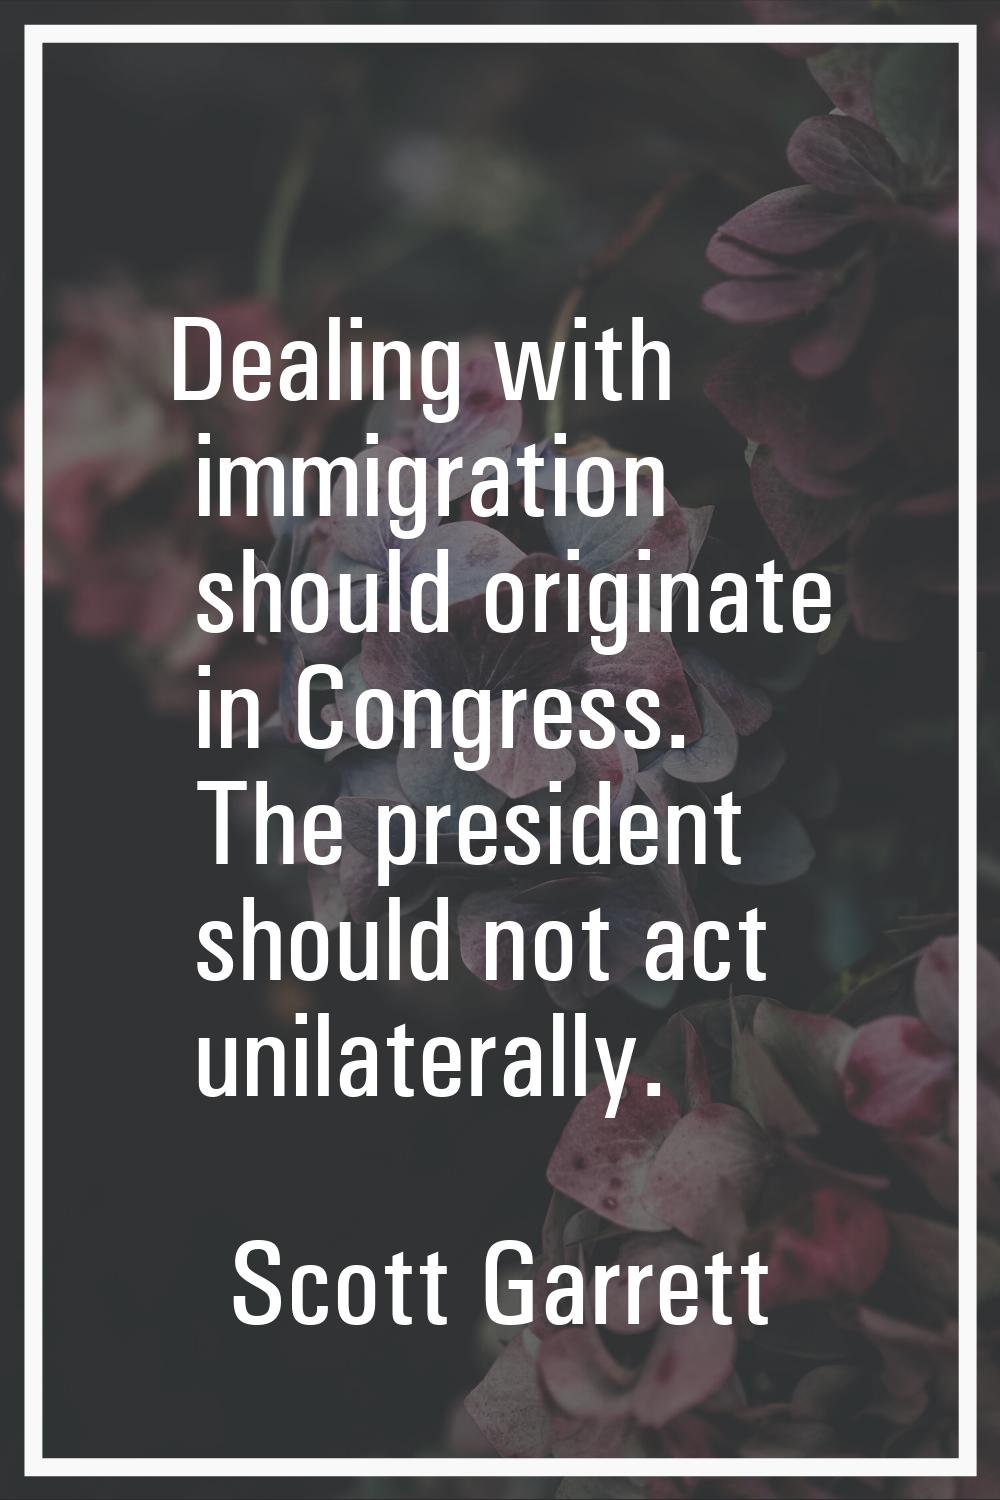 Dealing with immigration should originate in Congress. The president should not act unilaterally.